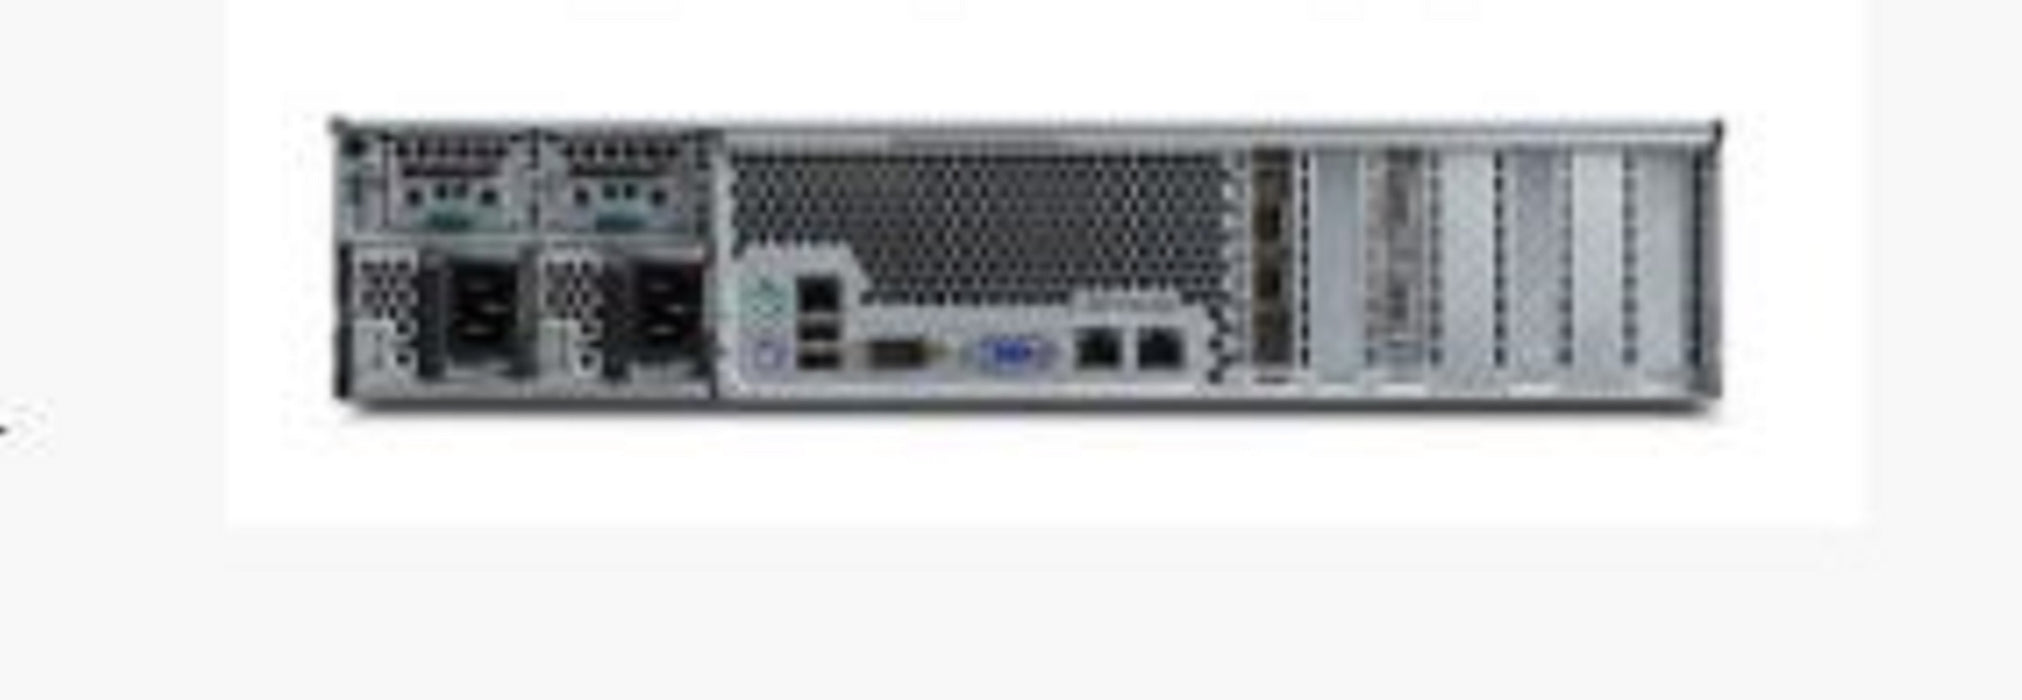 Isilon X200 96TB 4-Node Cluster with 2 x 8-Port Infiniband switches